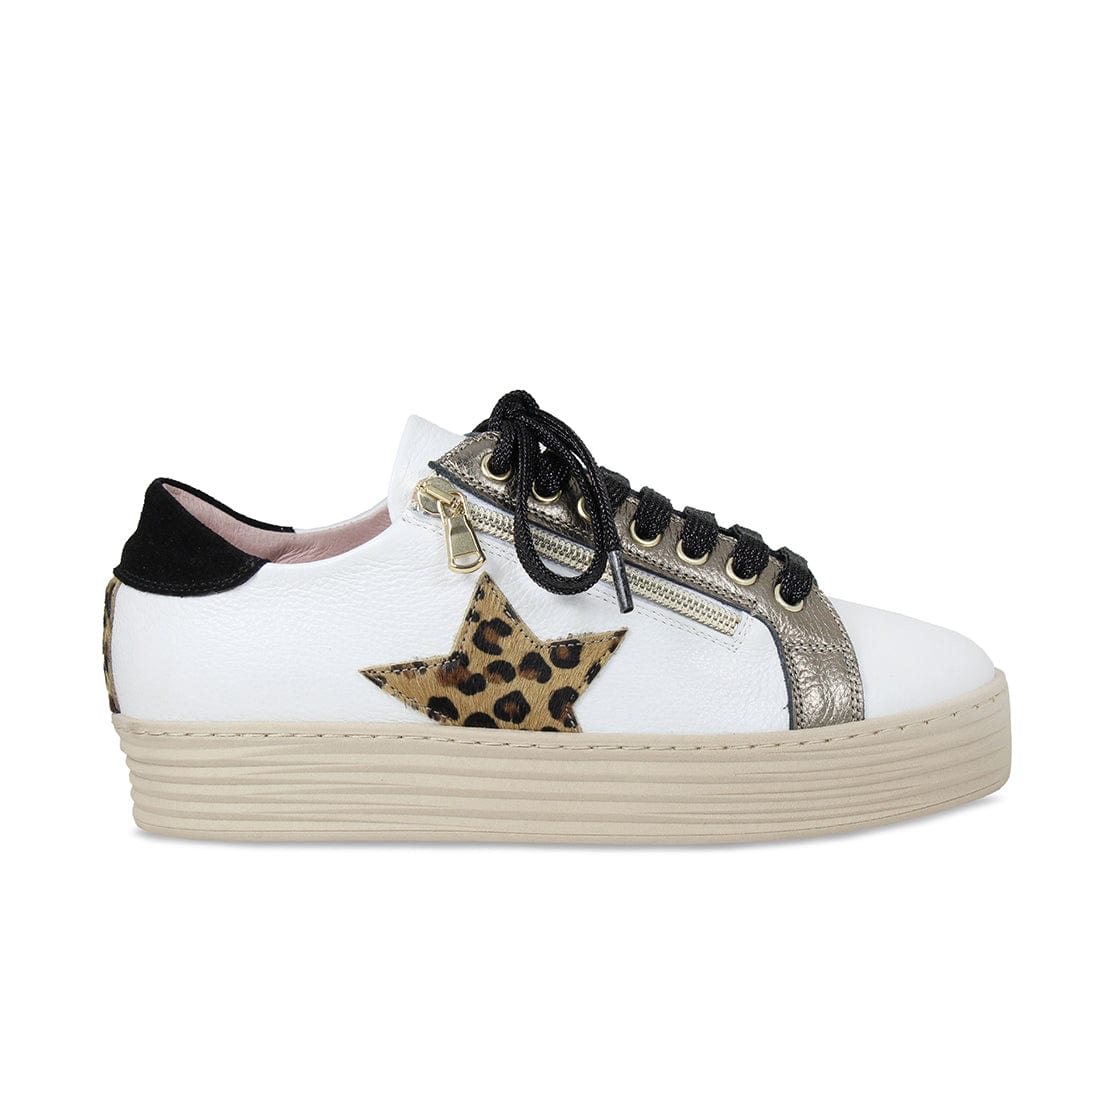 Buy Plus Size 43 Women Canvas Shoes Leopard Sneakers Ladies Flat Heel  Vulcanized Shoe Comfortable Shallow Loafers Round Toe Moccasin (Color :  Multicolor 1, Size : 6) Online at Lowest Price Ever